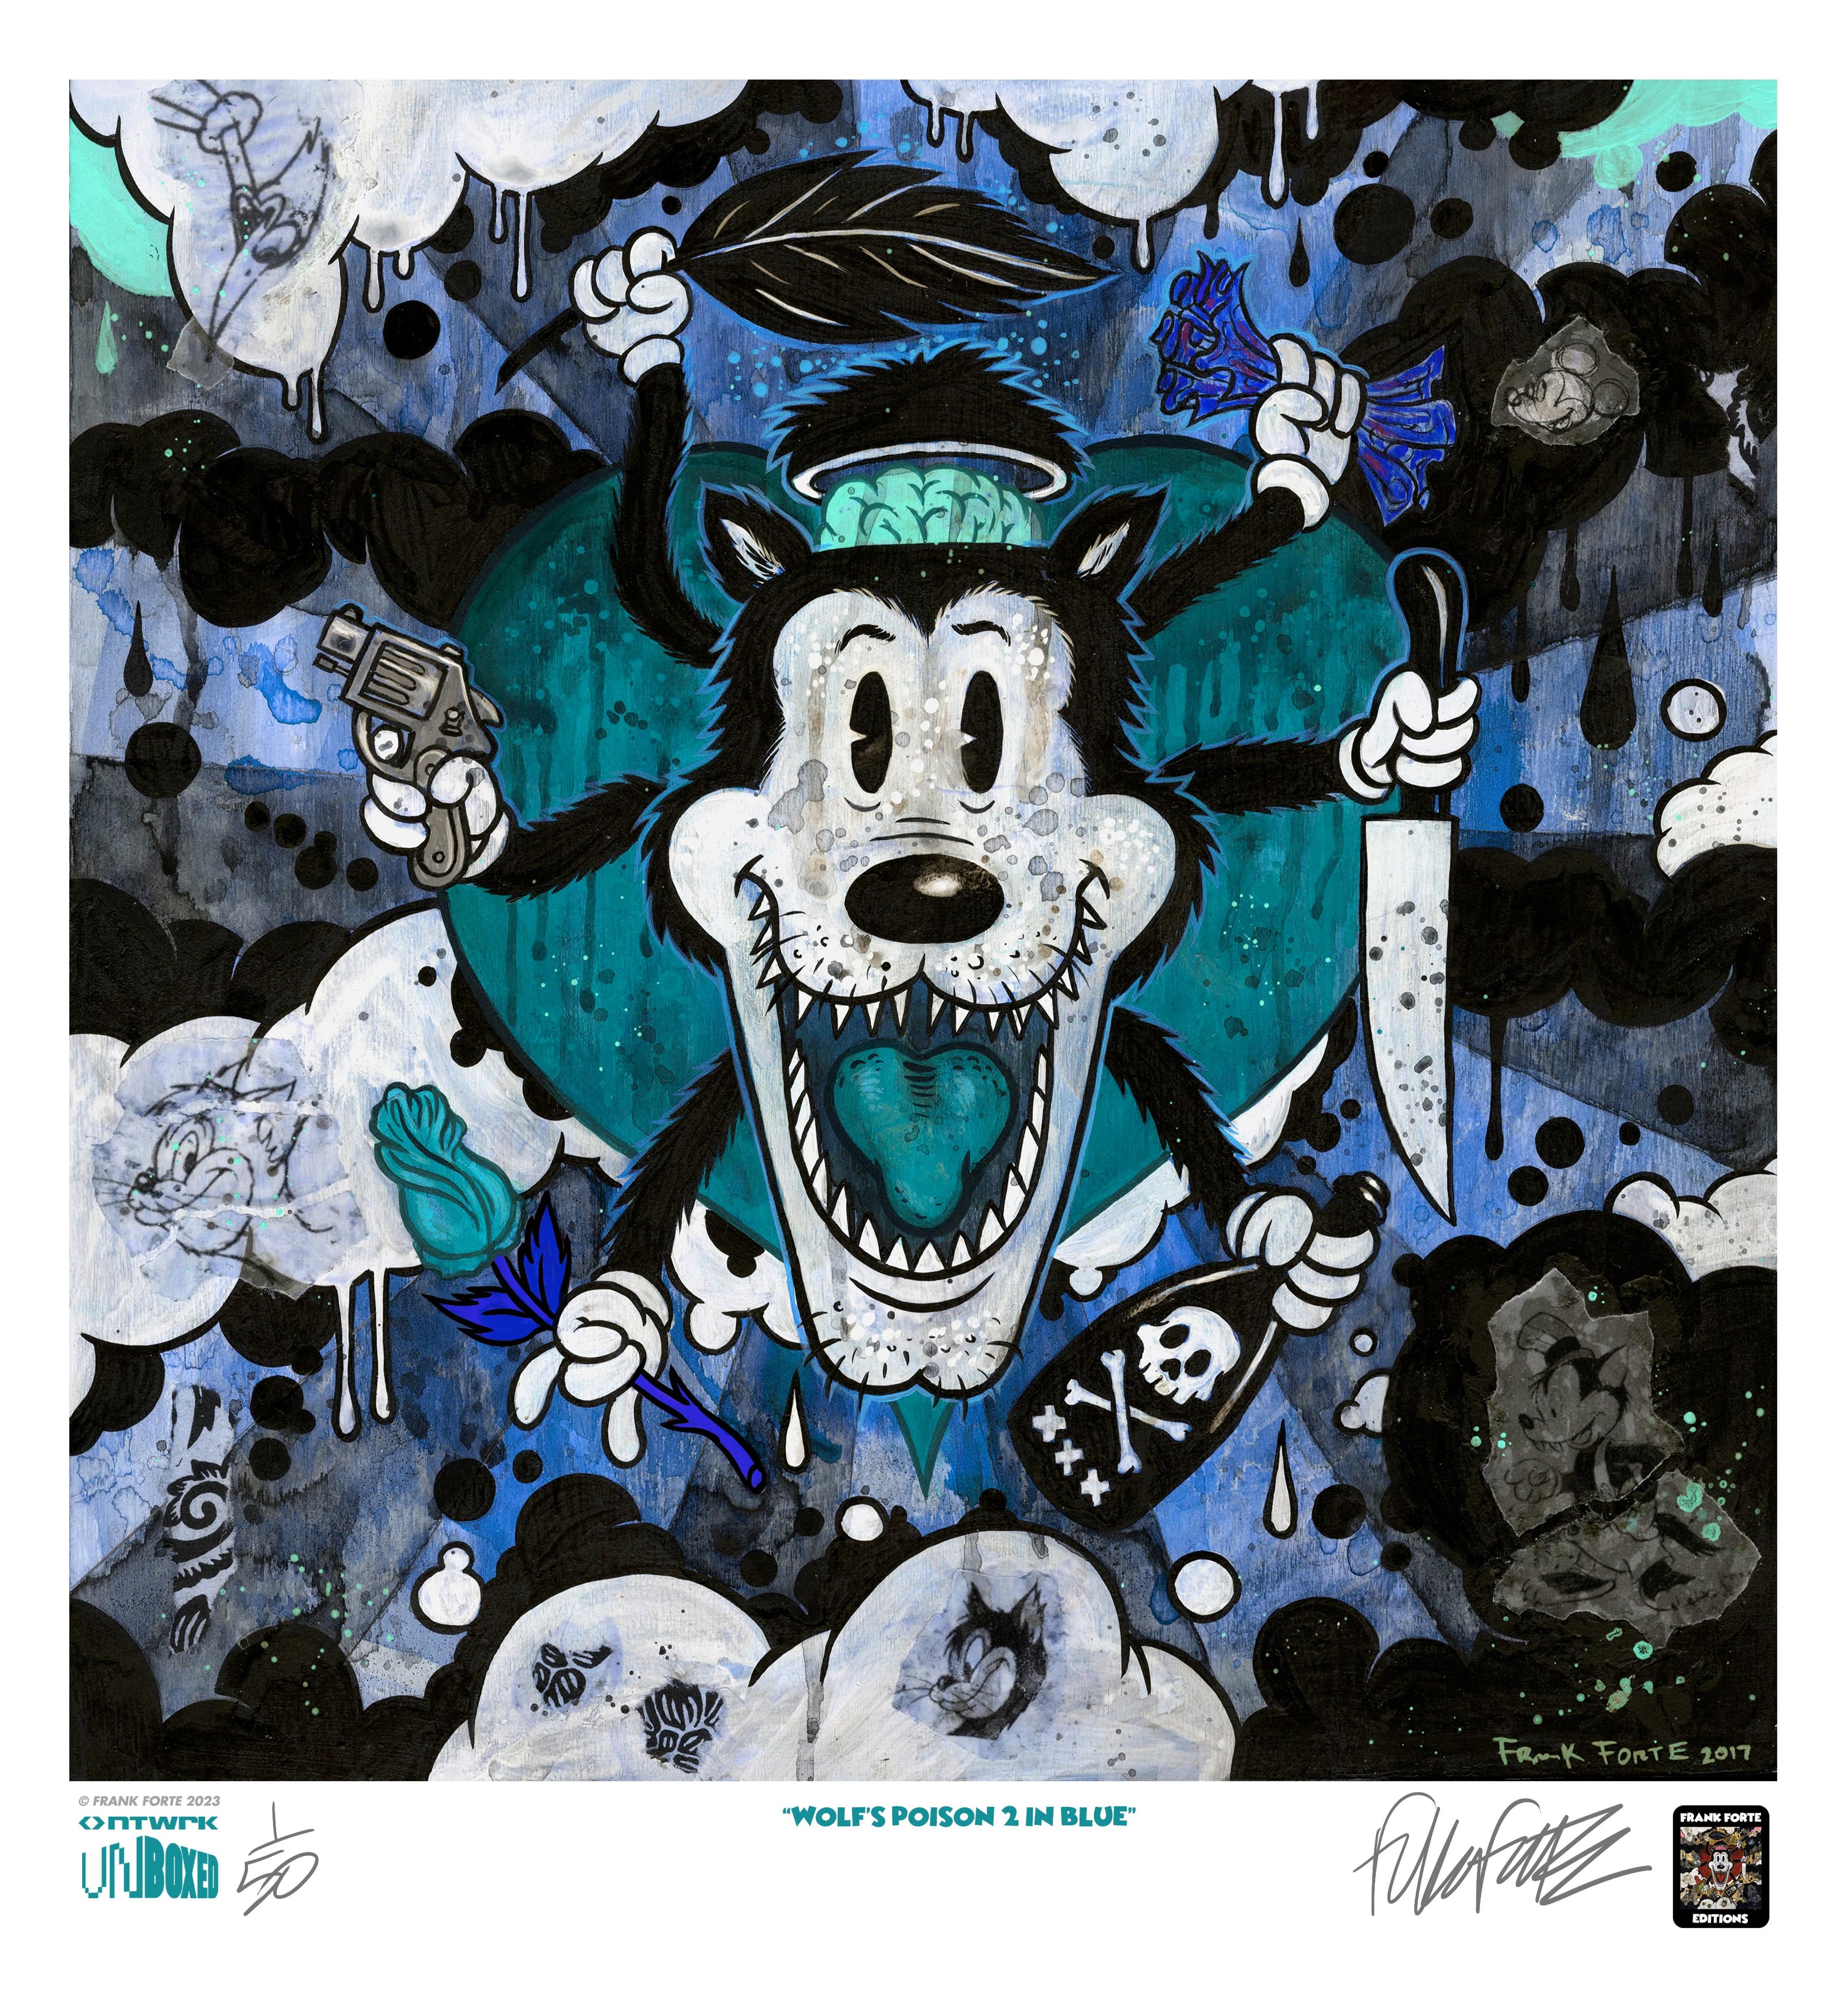 "Wolf's Poison 2 in Blue" by Frank Forte Limited Edition NTWRK U